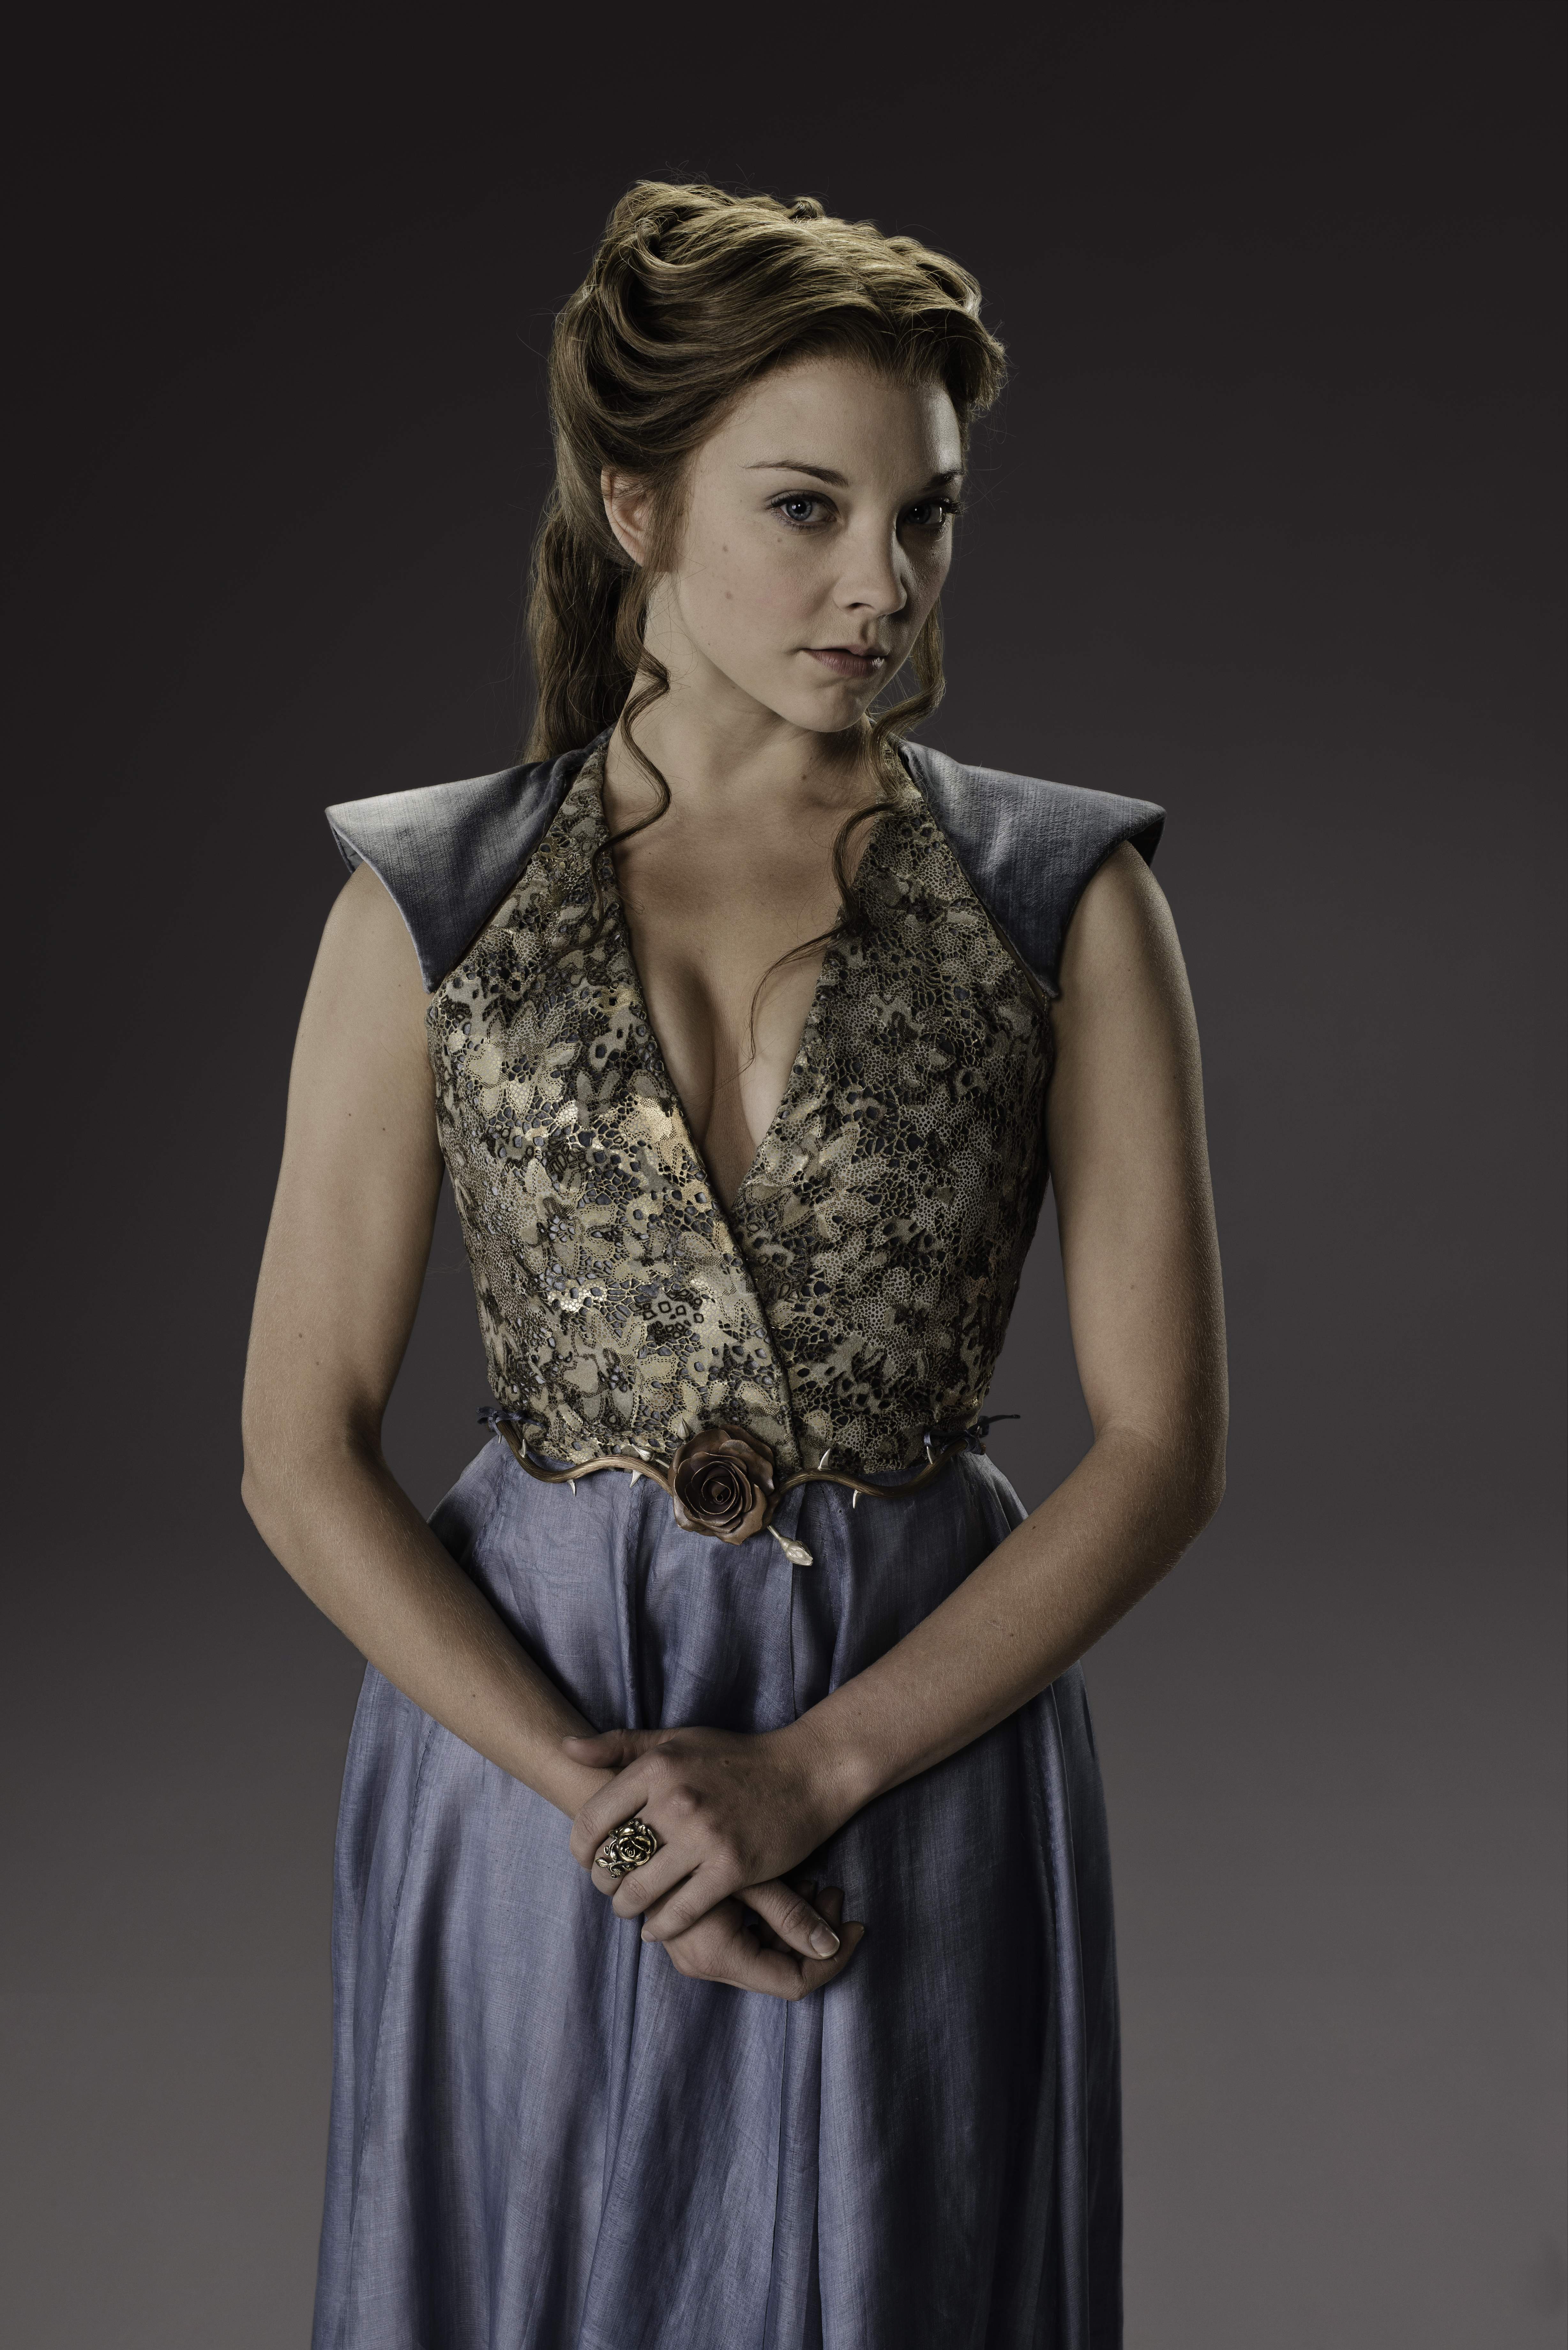 Measurement Sanctuary relief margaery tyrell - Margaery Tyrell foto (37593348) - fanpop